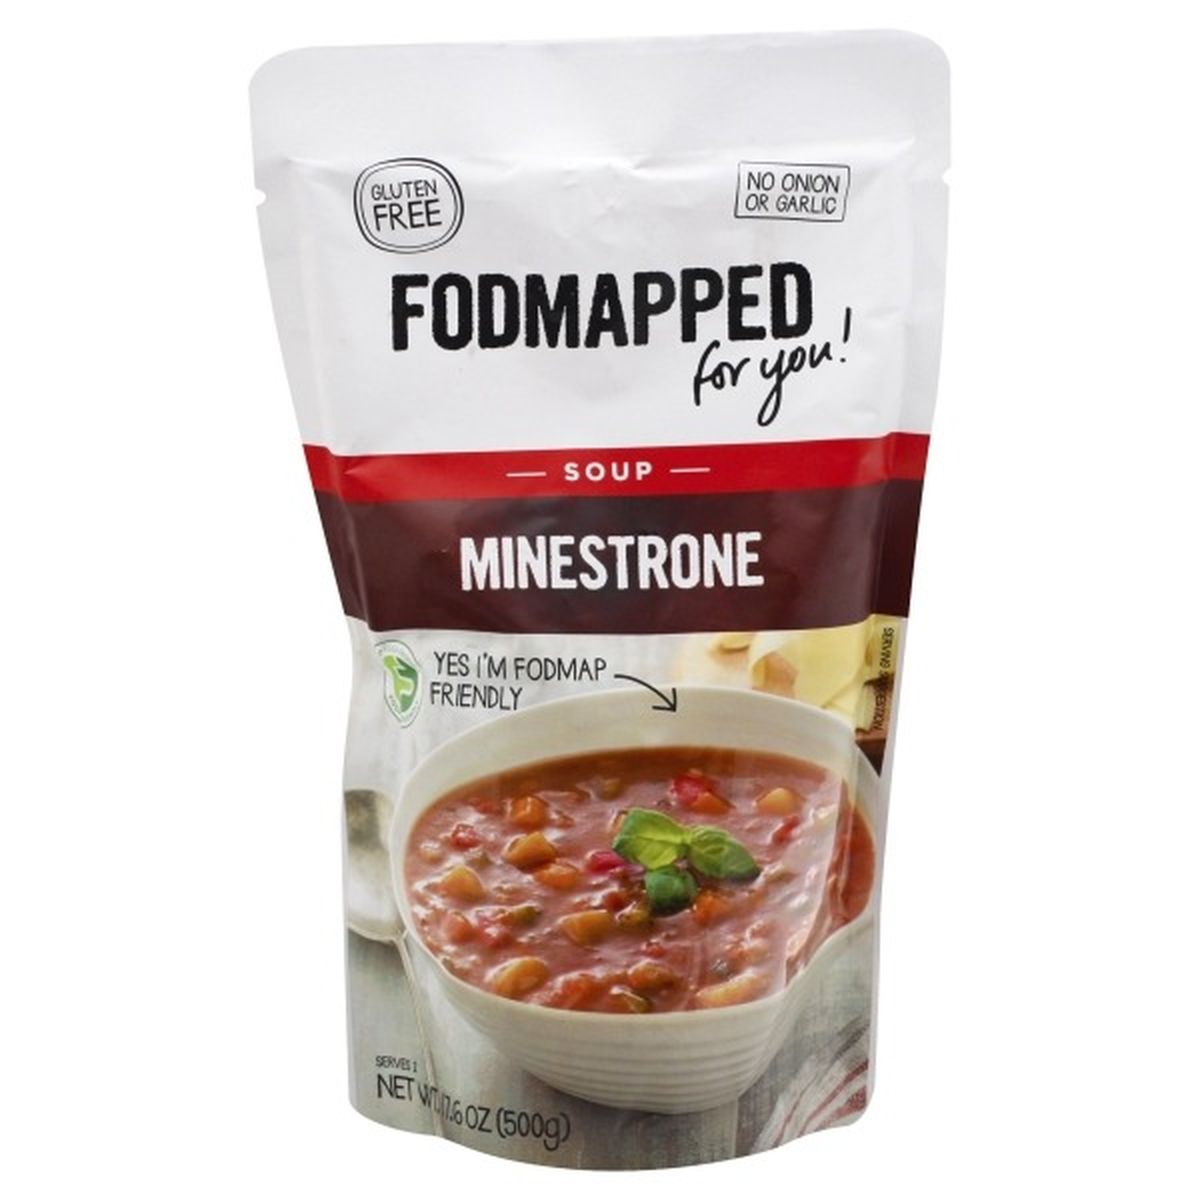 Calories in Fodmapped Soup, Minestrone